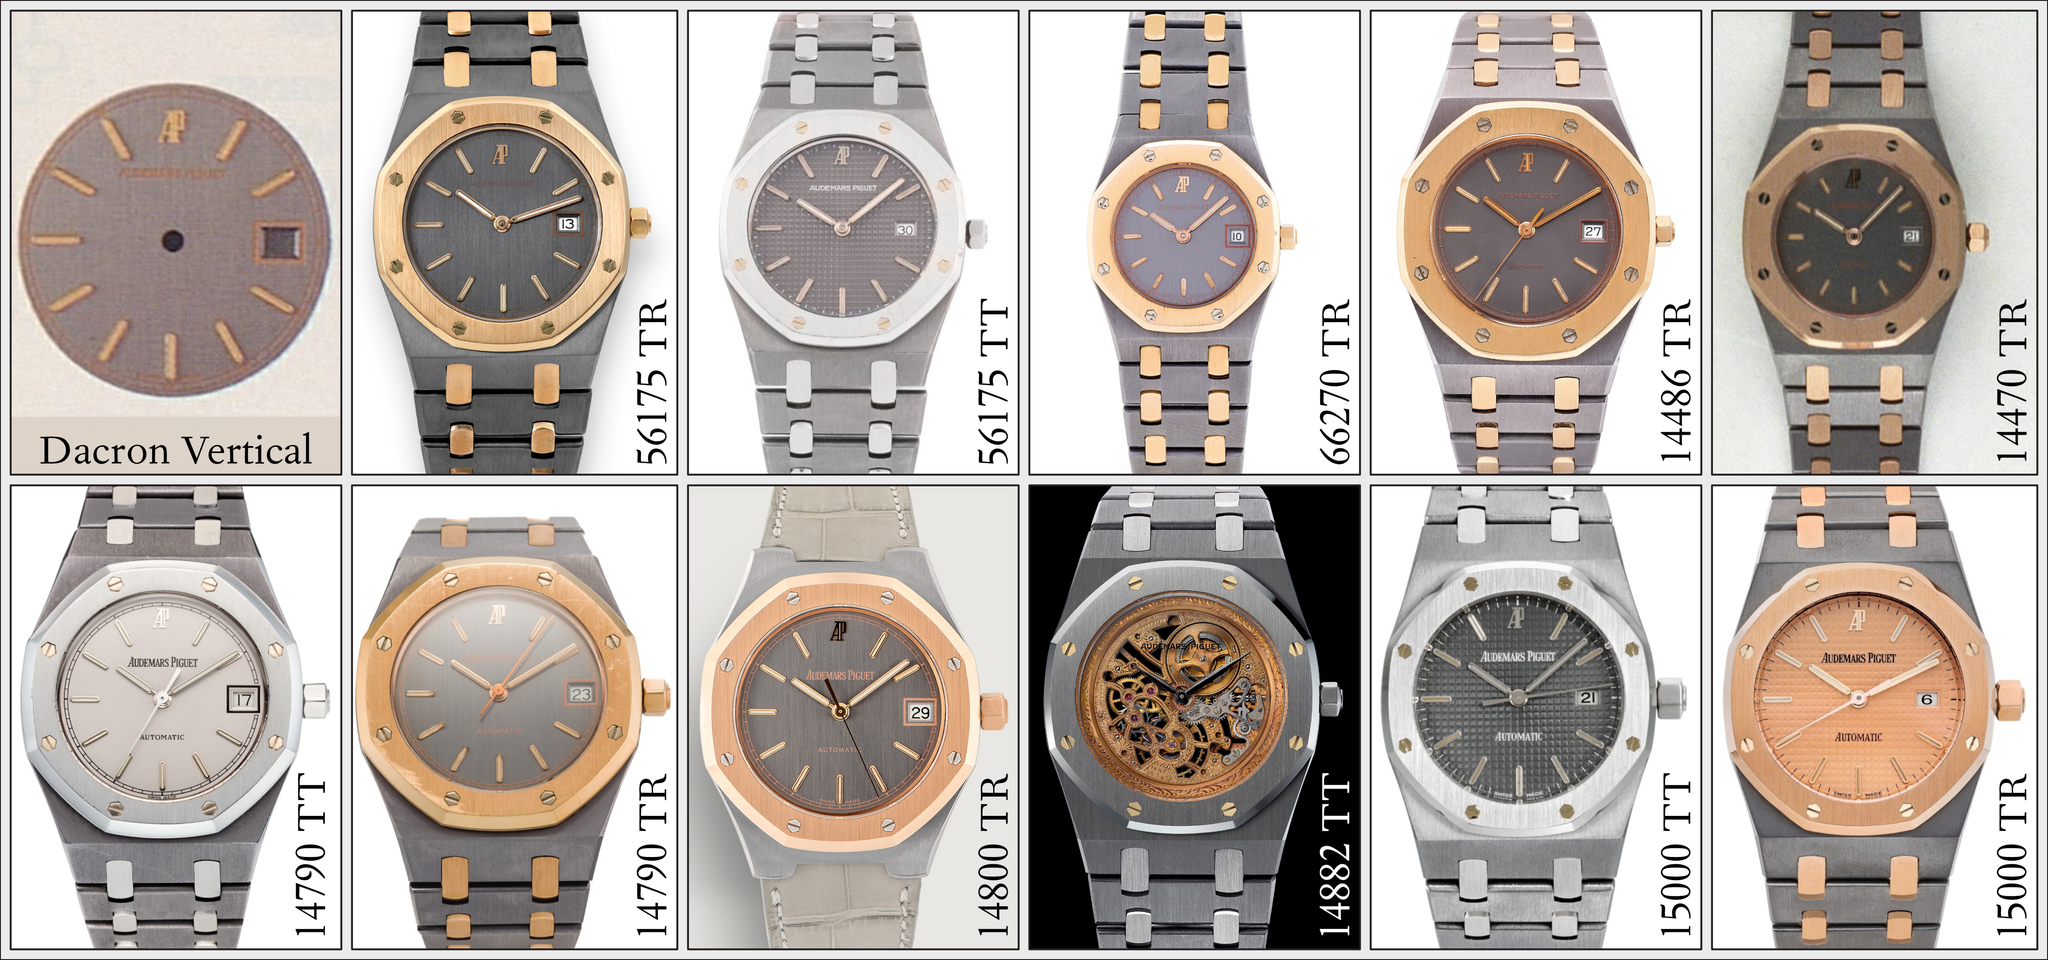 Overview over 8 out of 9 Royal Oak Tantalum time-only models